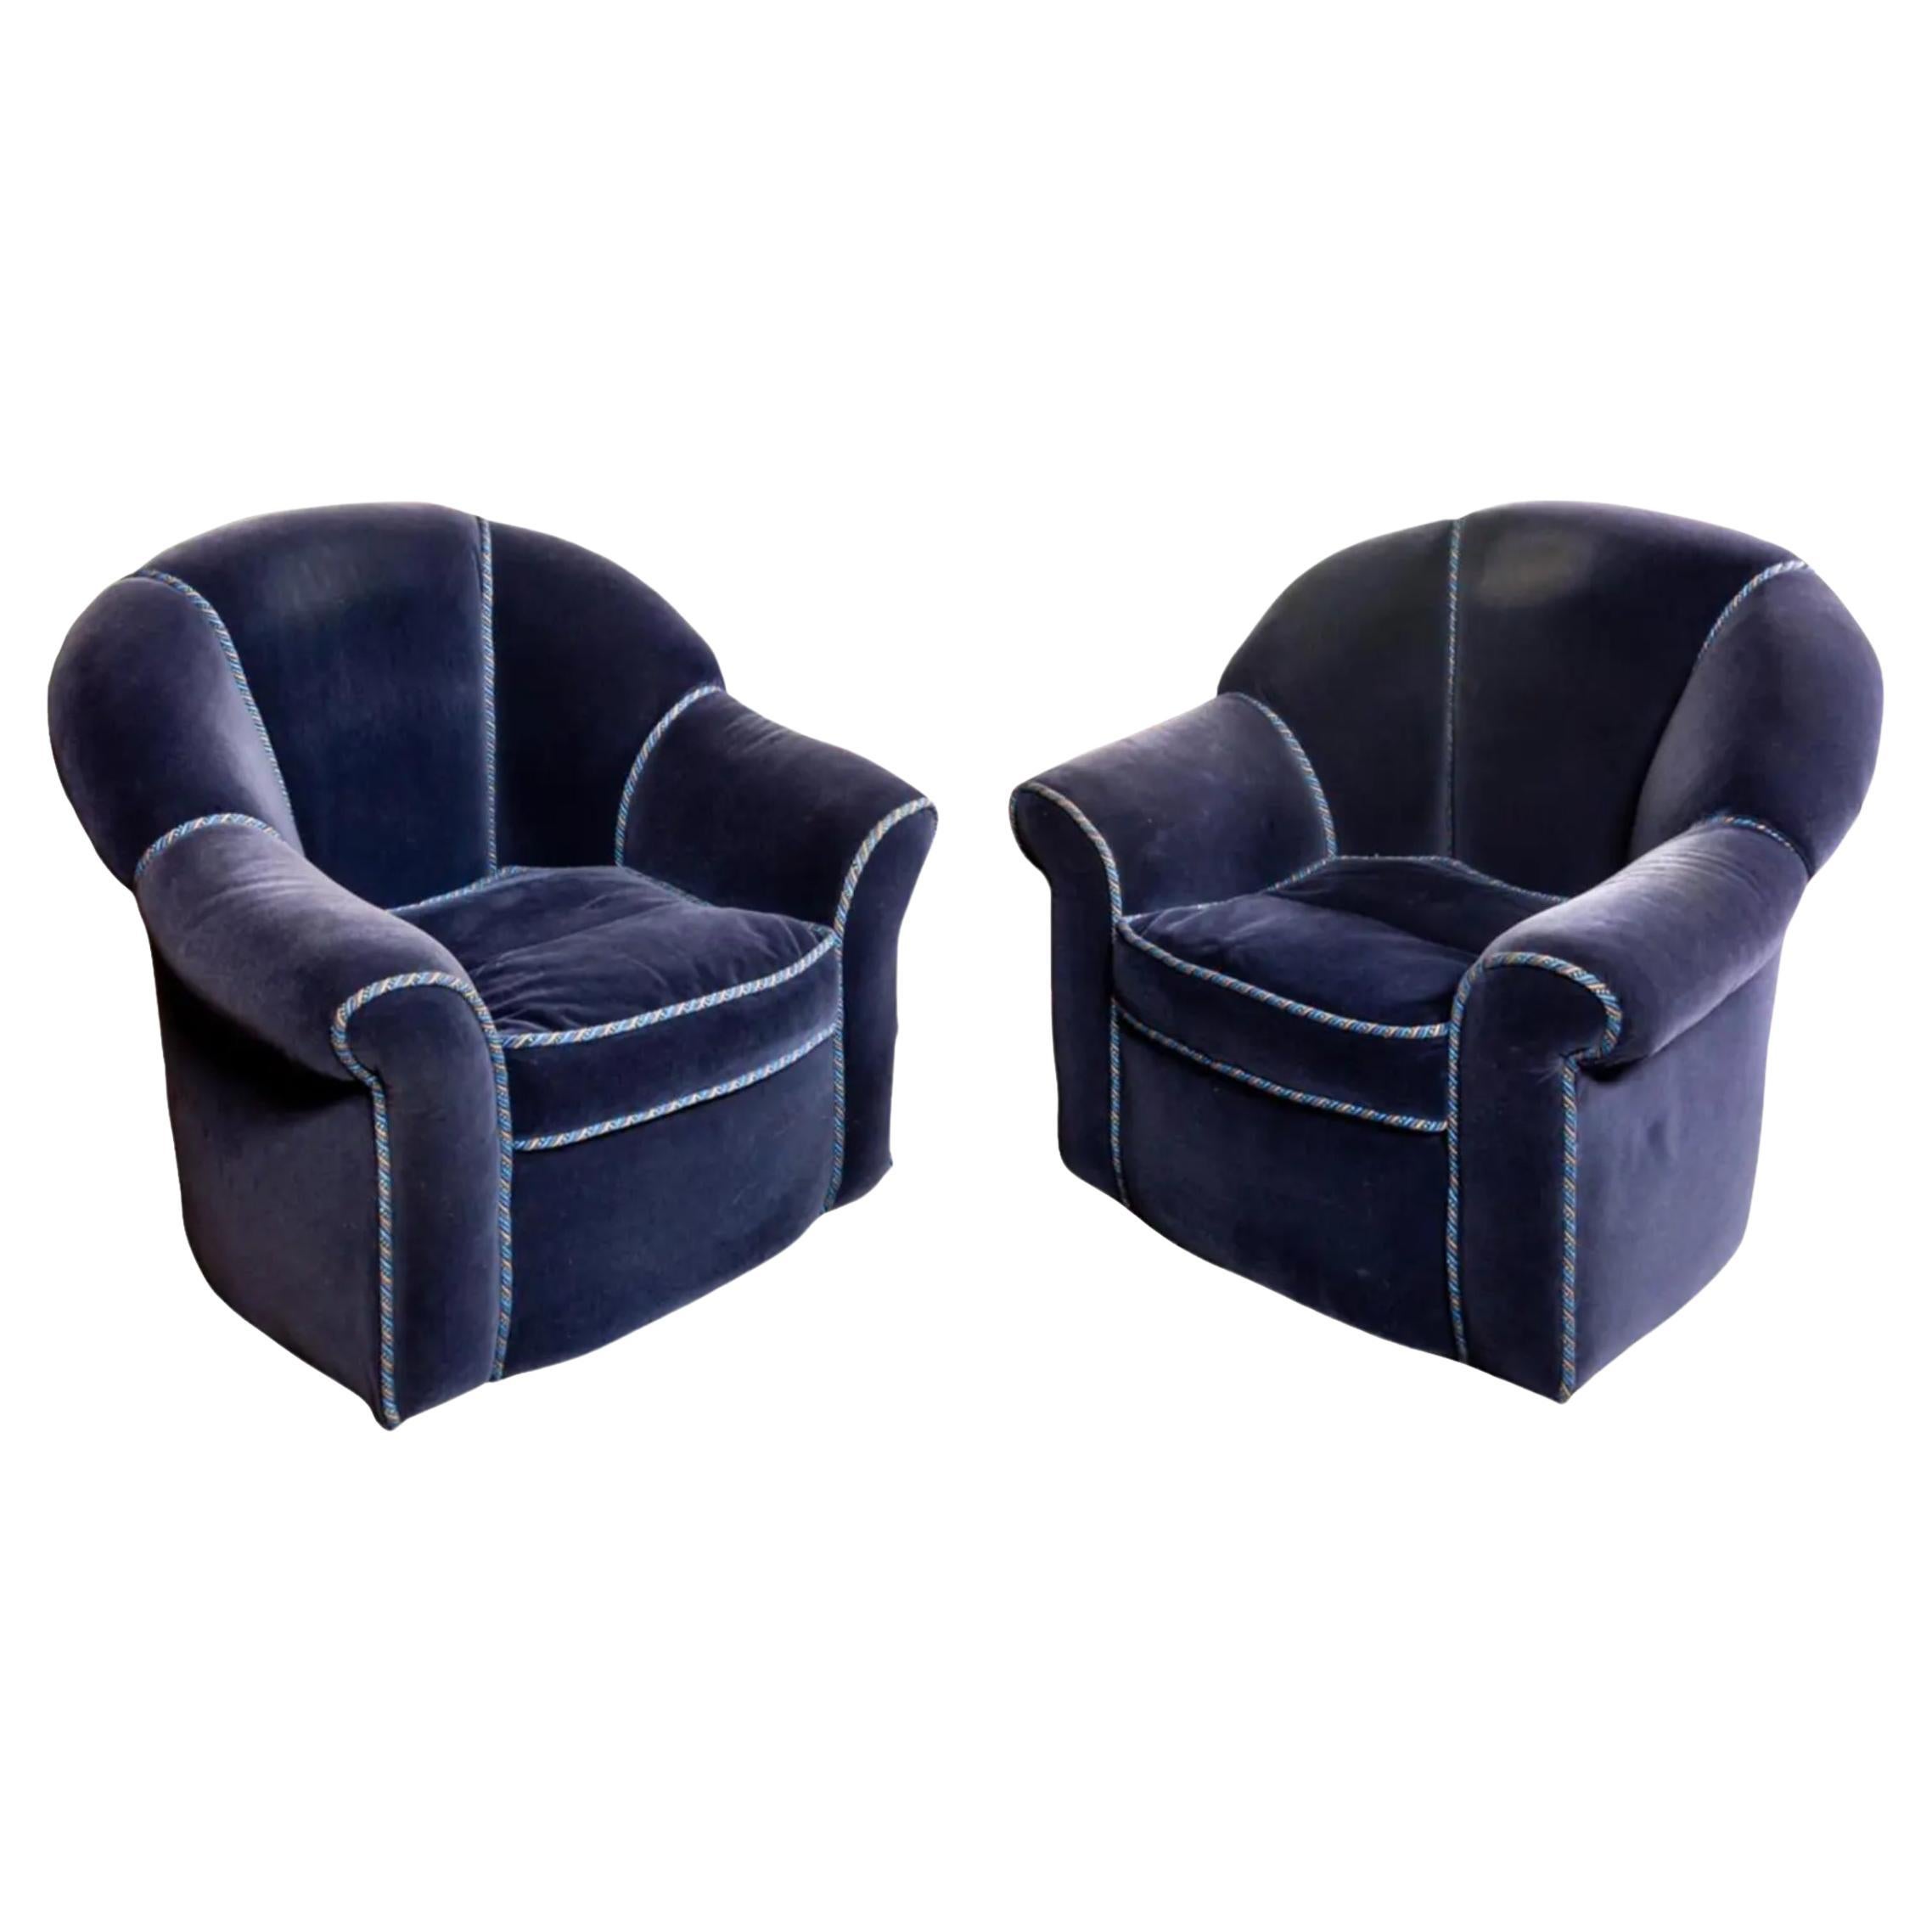 Pair of Art Deco Style Fully Upholstered Sapphire Blue Velvet Club Chairs For Sale